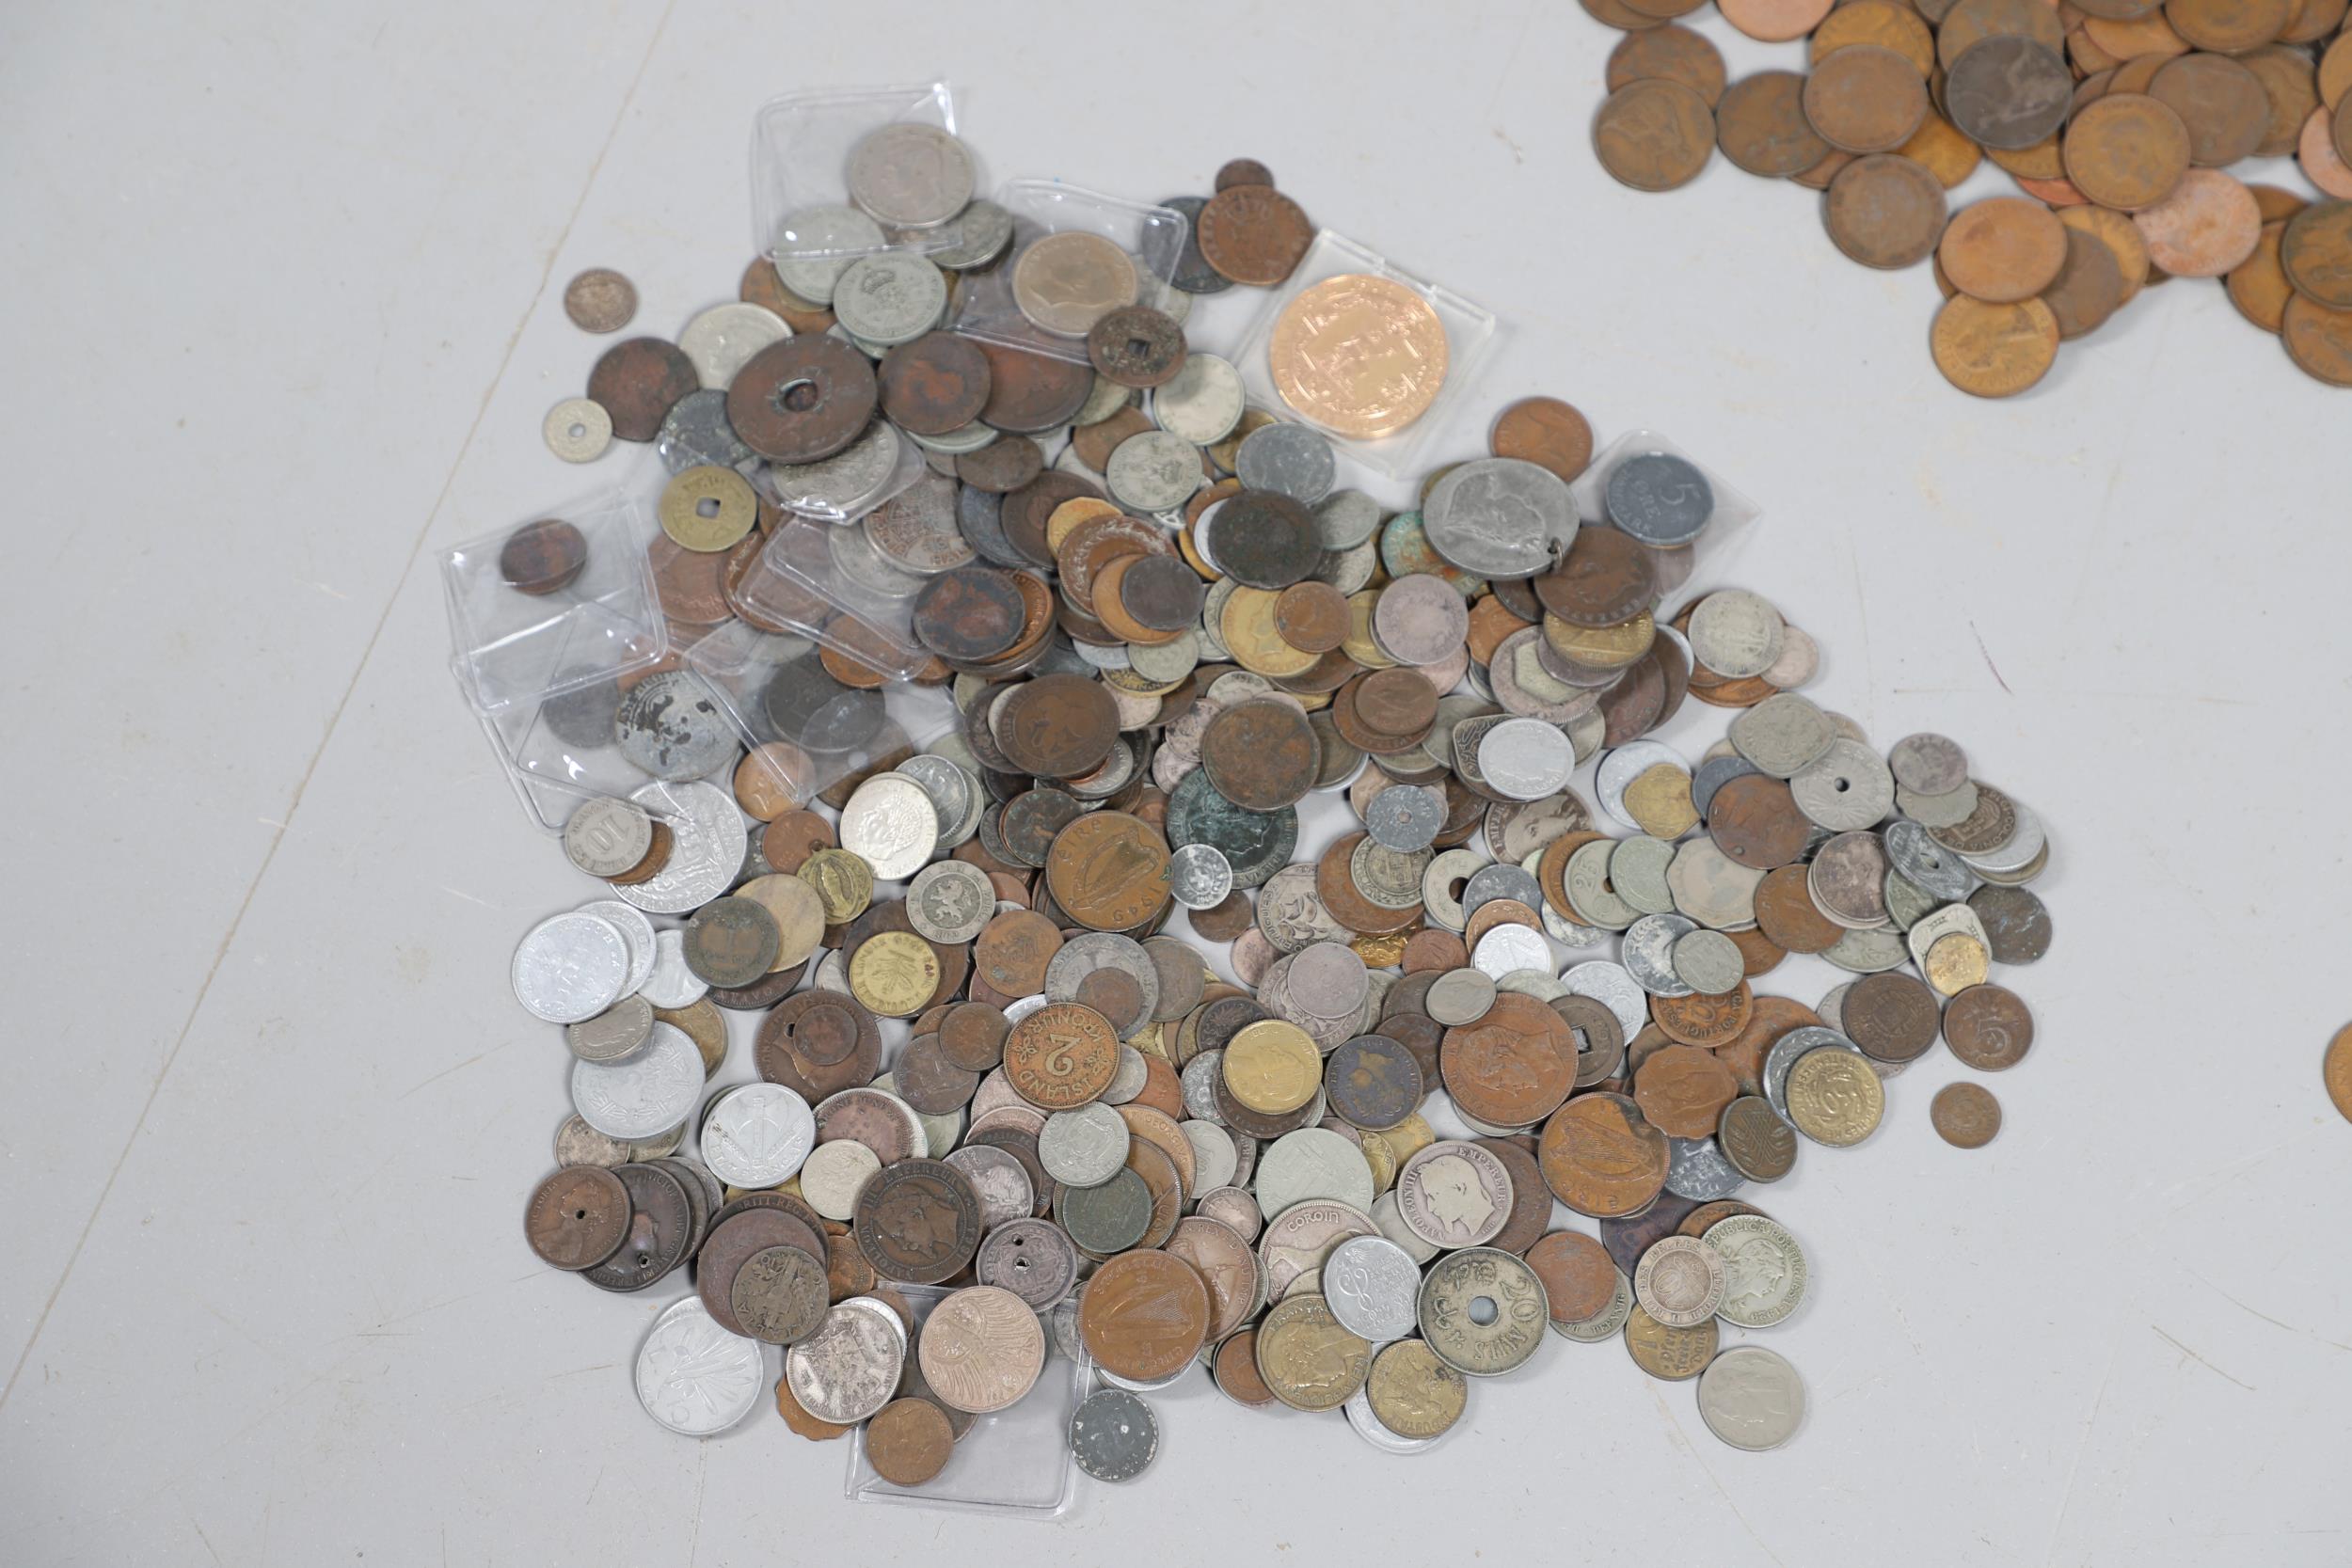 A LARGE COLLECTION OF WORLD COINS AND SIMILAR BRITISH COINS. - Image 7 of 20